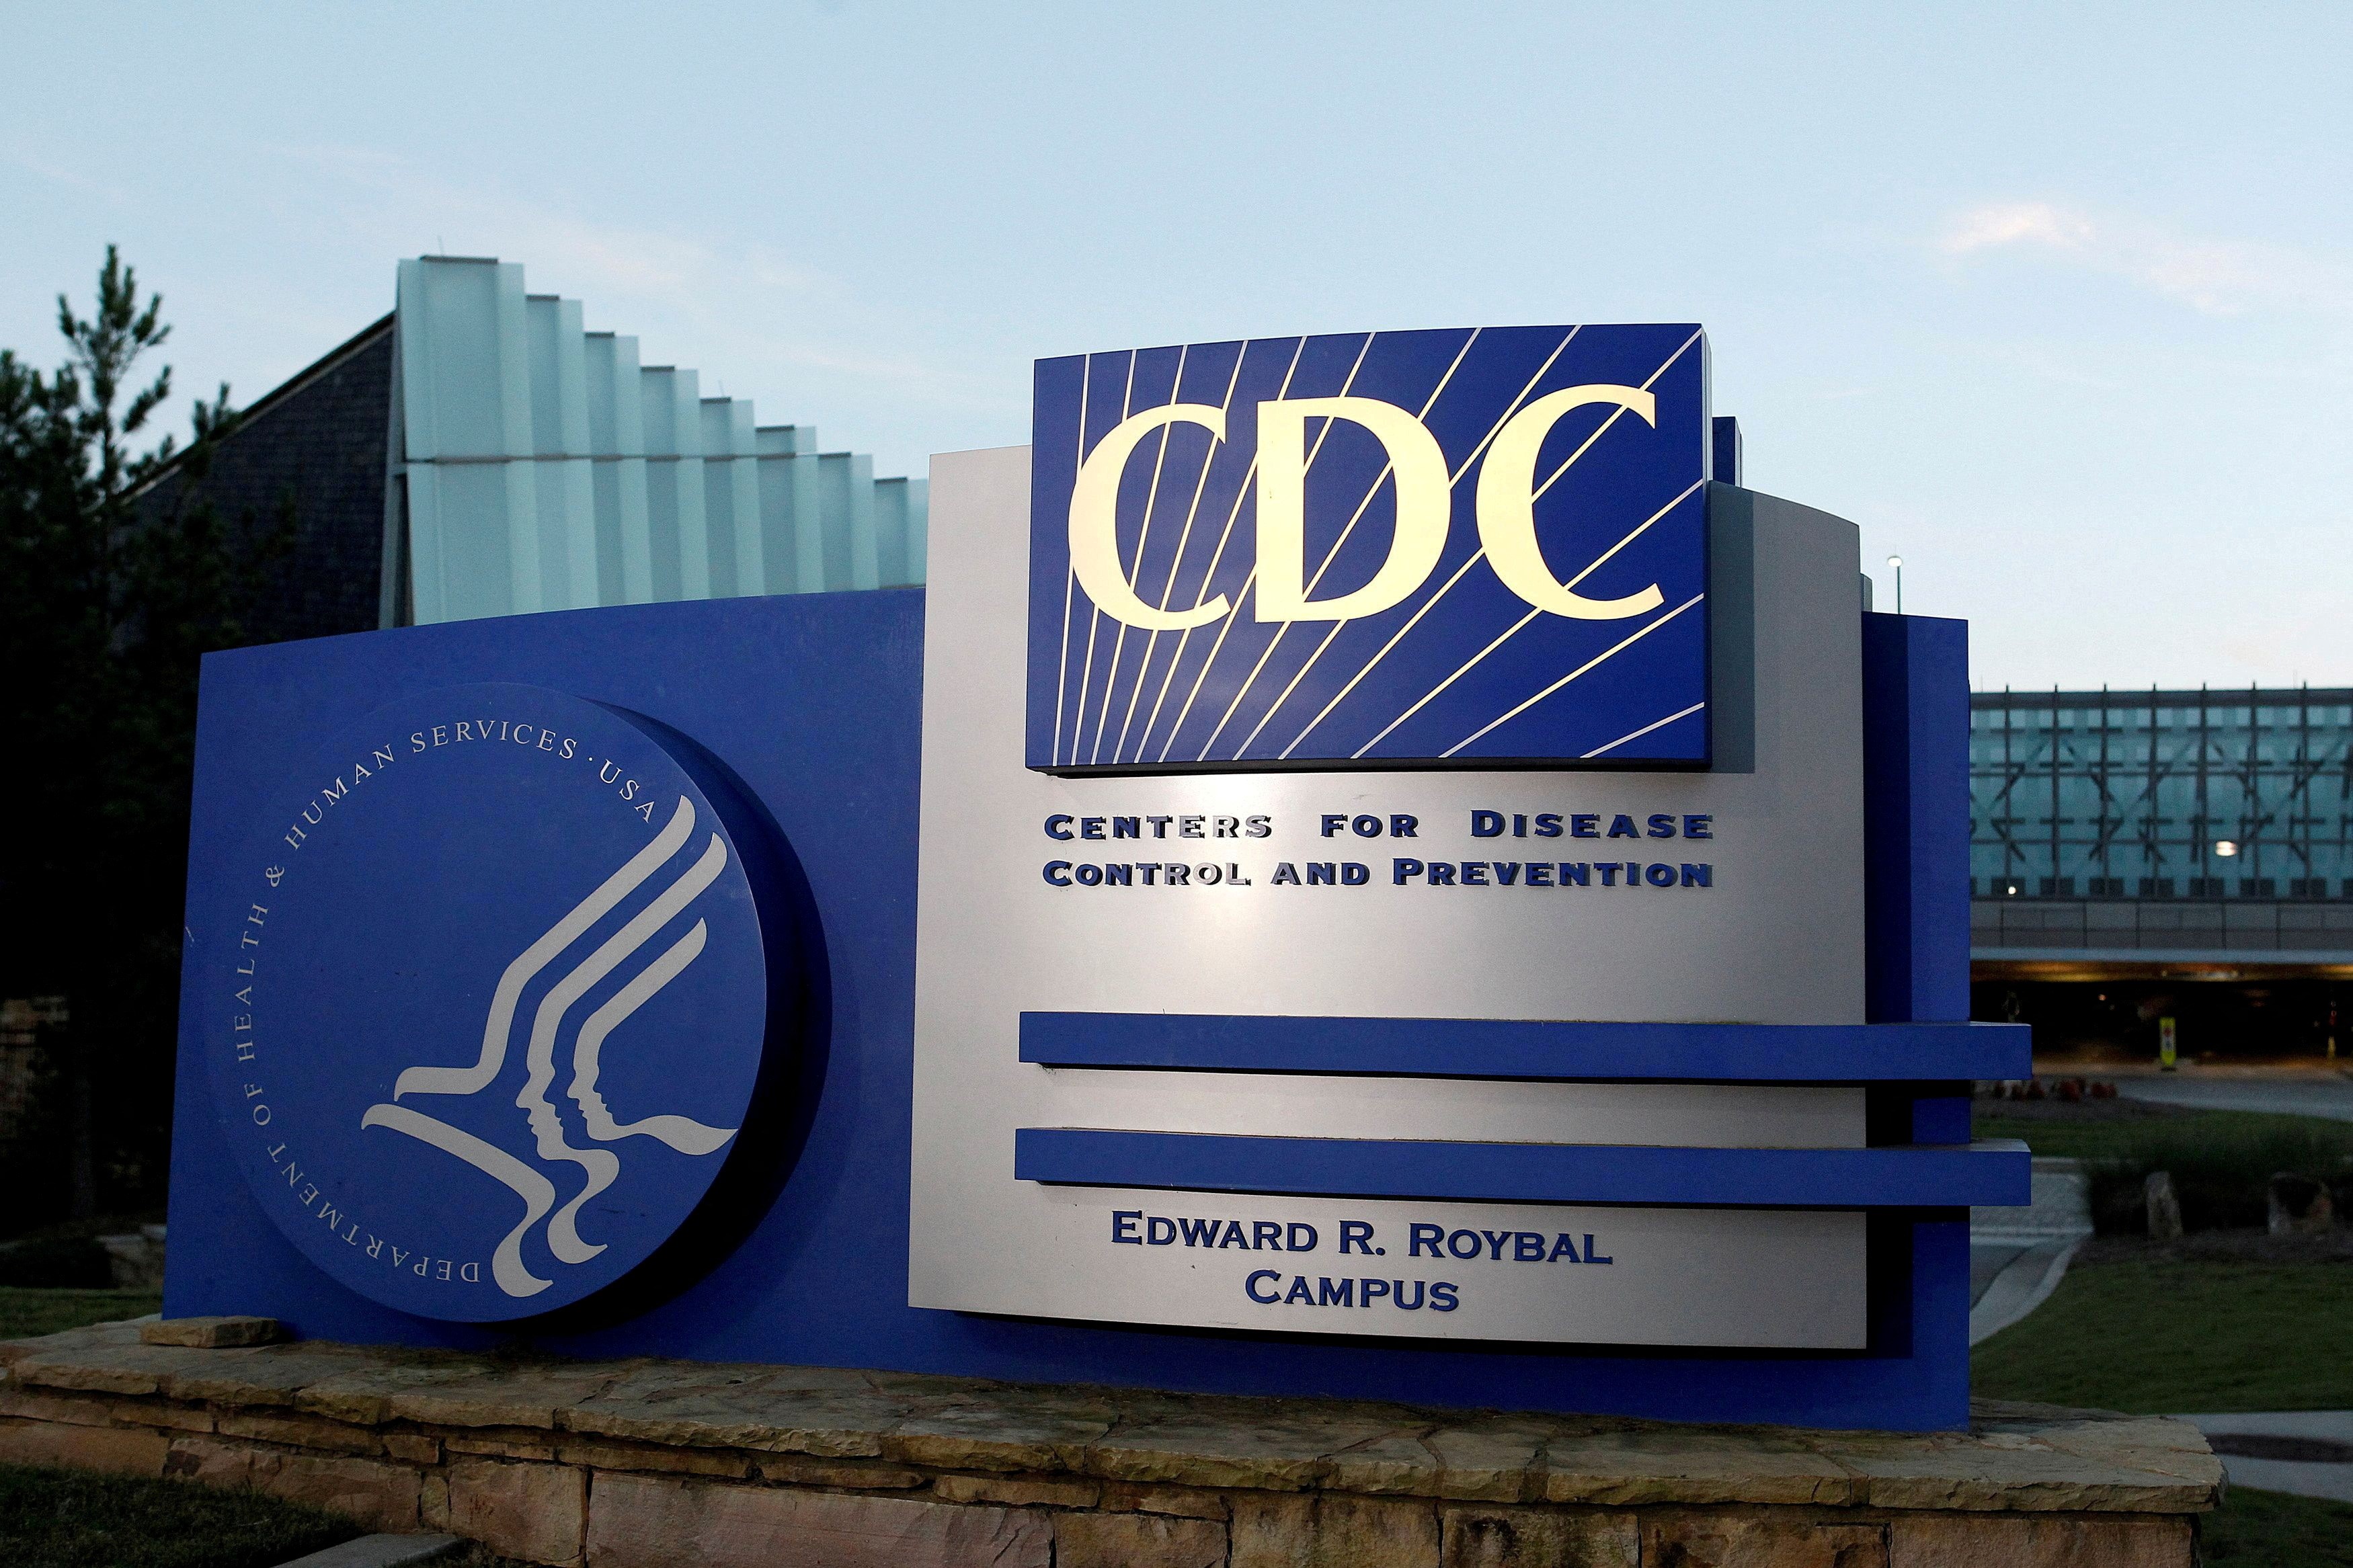 Not enough data to support multiple annual COVID boosters, U.S. CDC advisers say